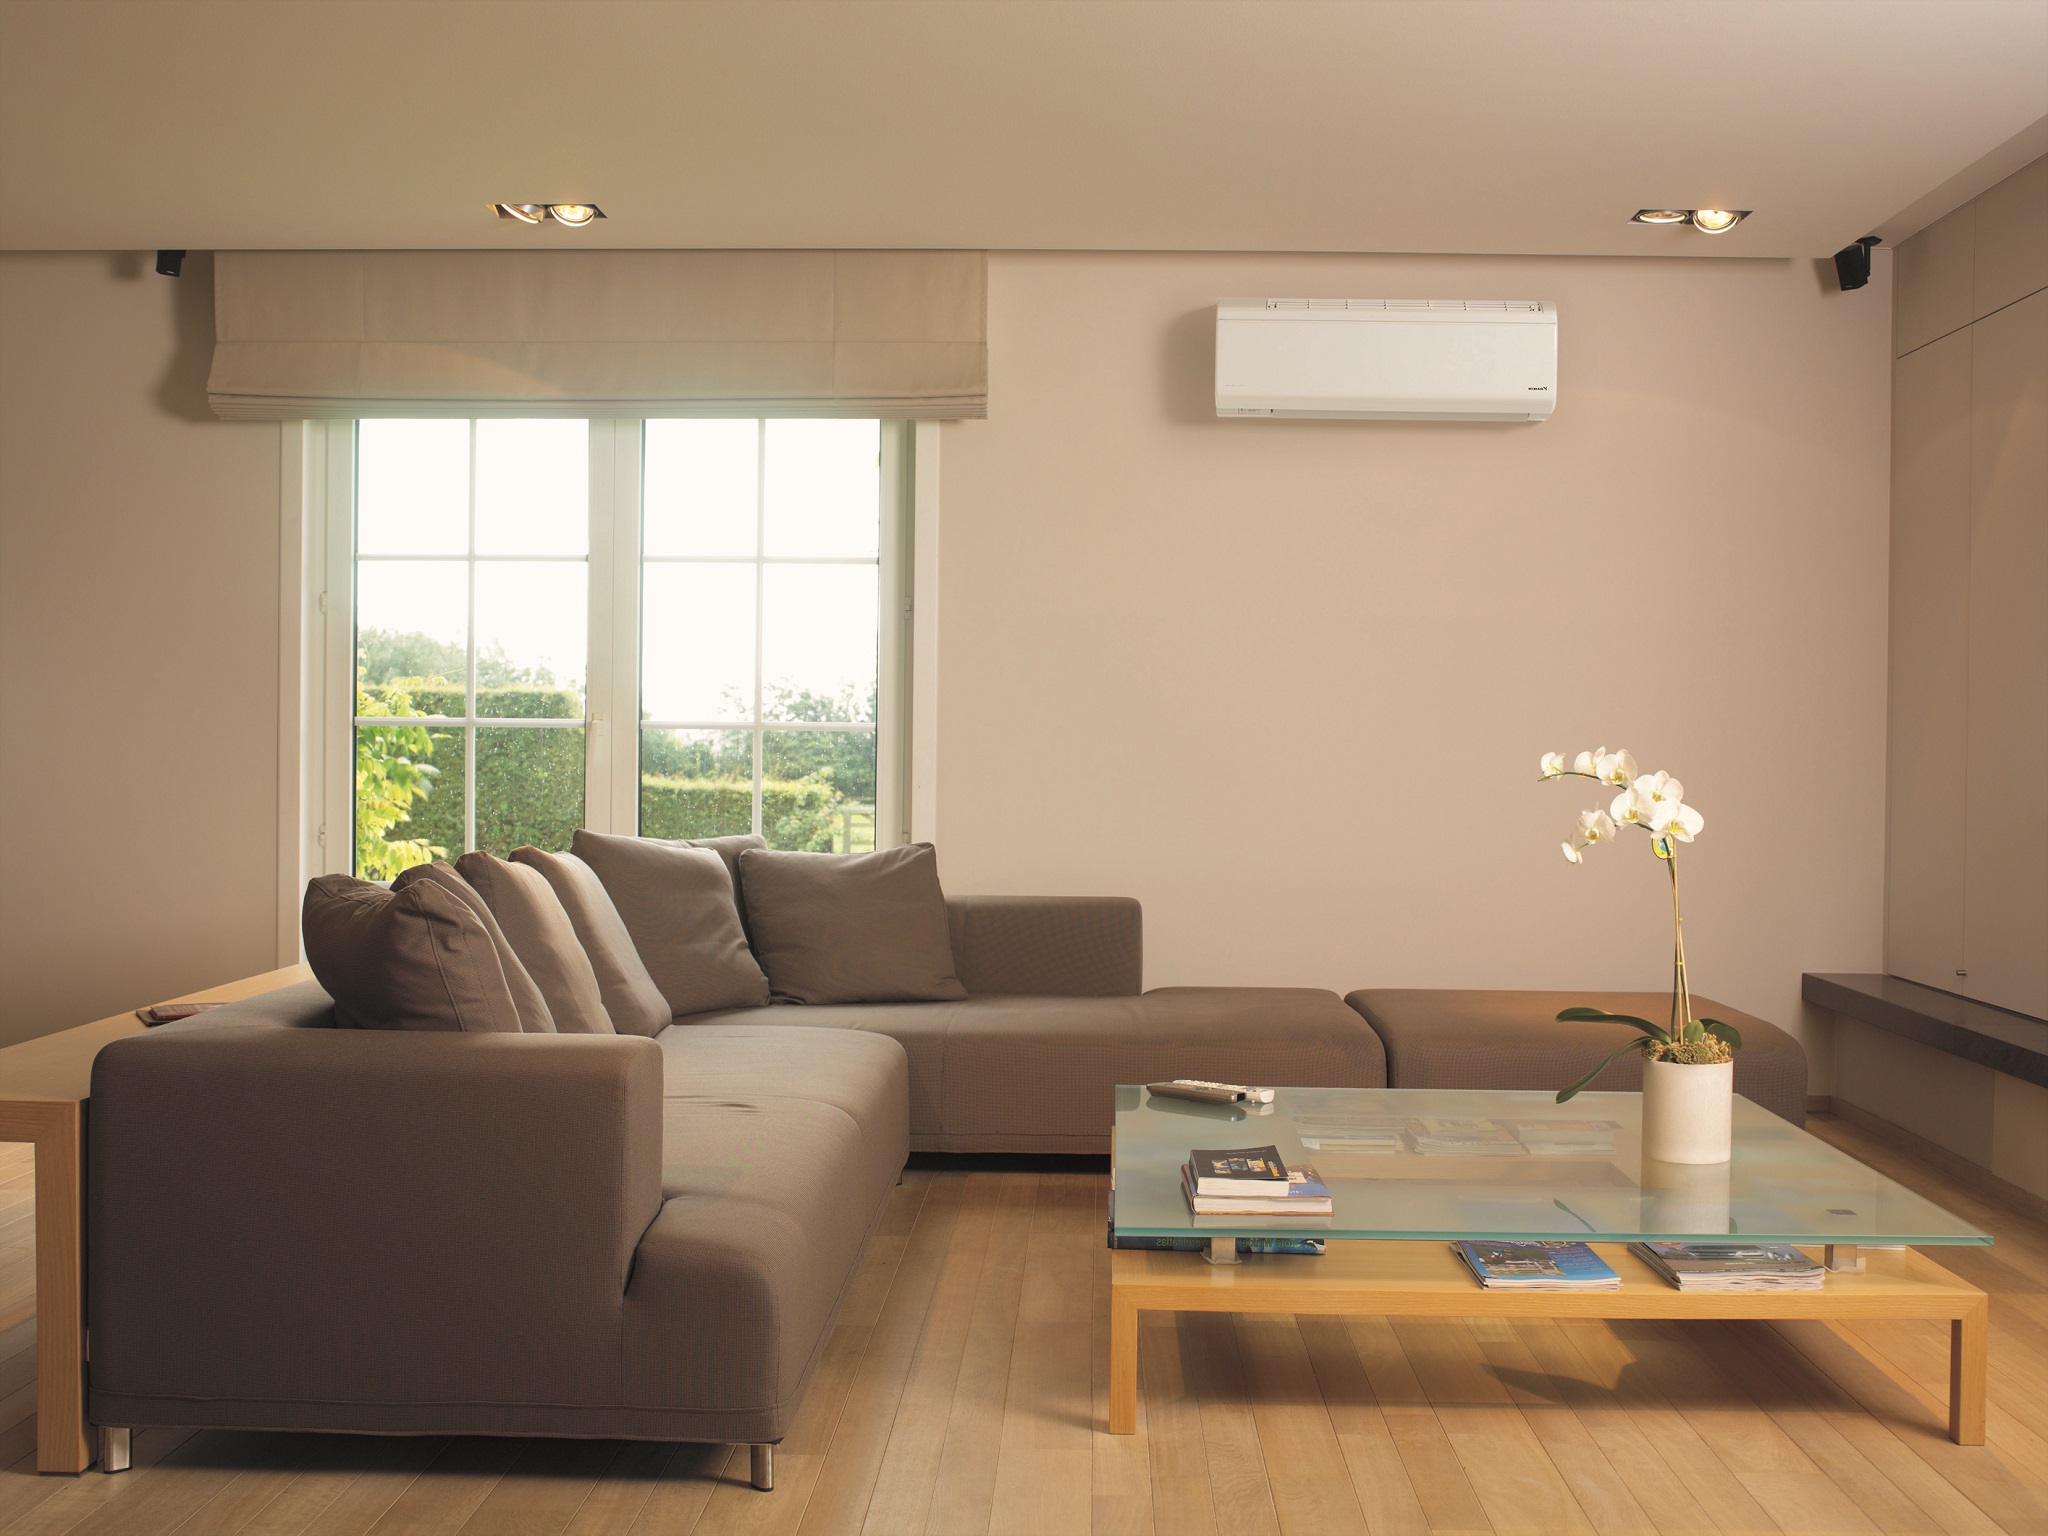 Imbibe Few Practical Repairing Tips for AC System